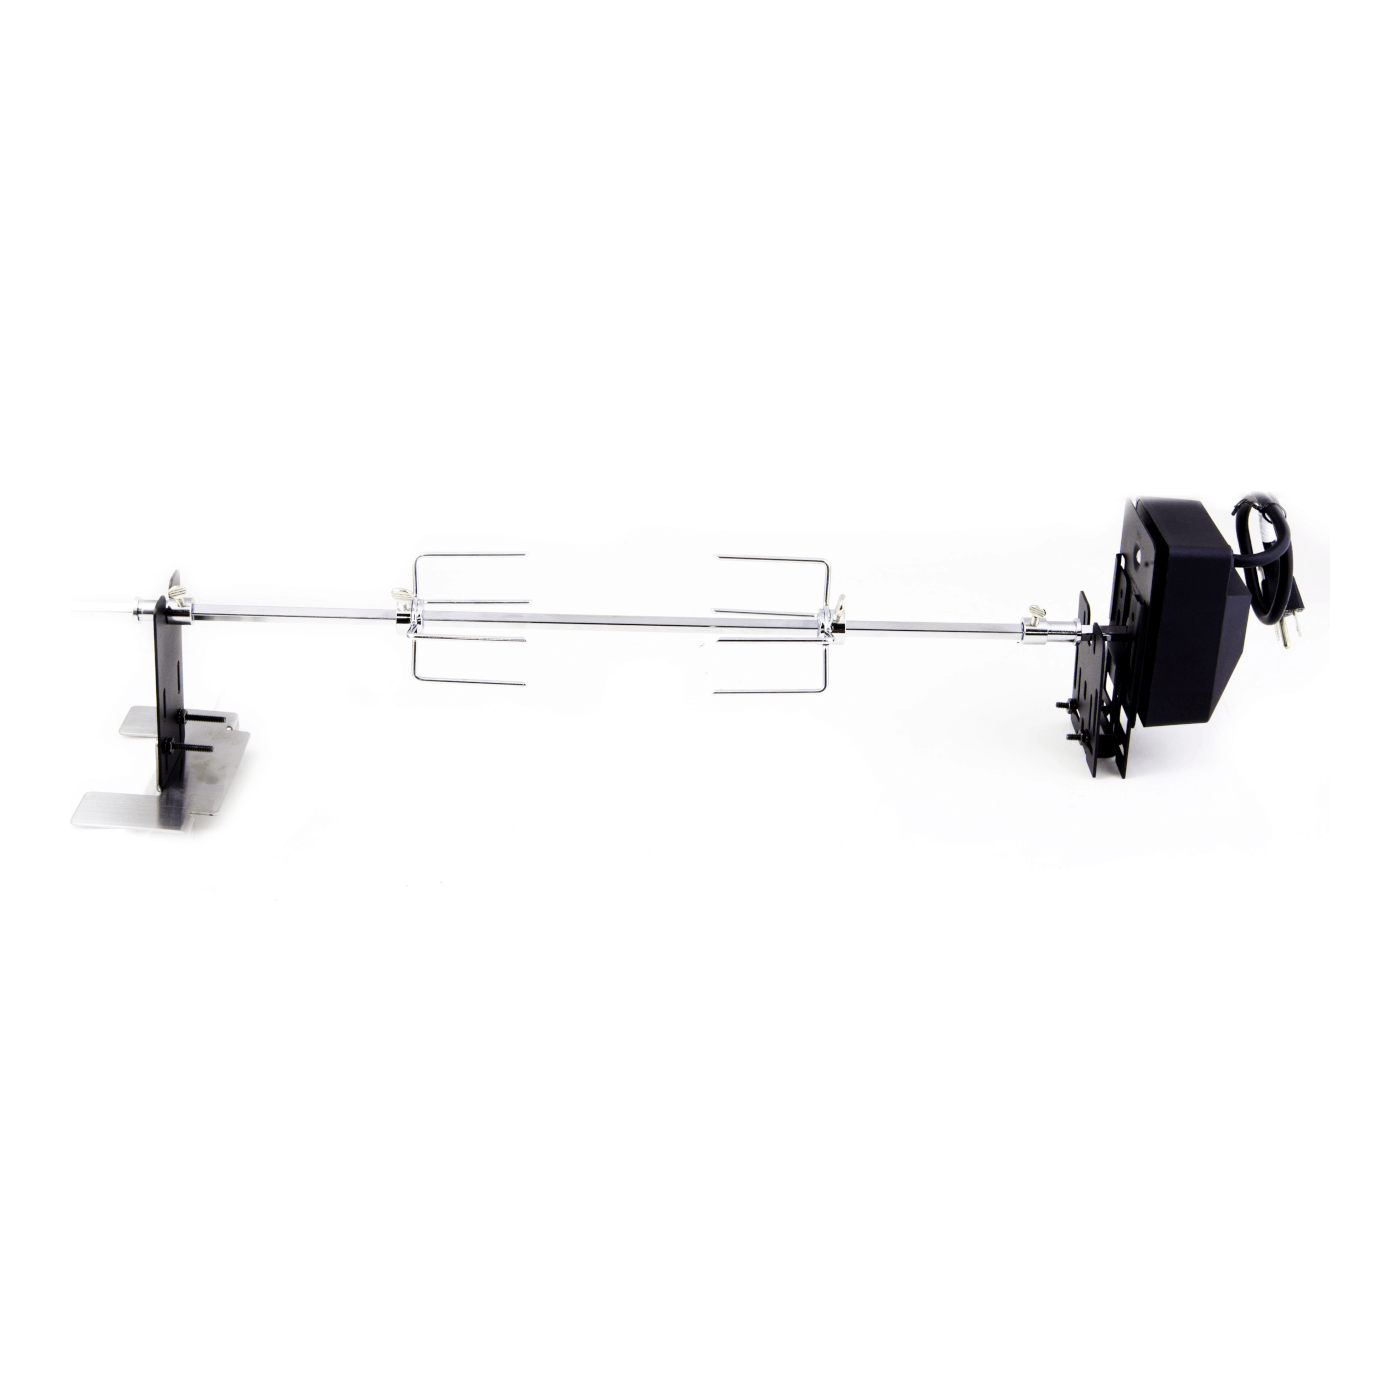 Char-Broil Universal Rotisserie Accessory